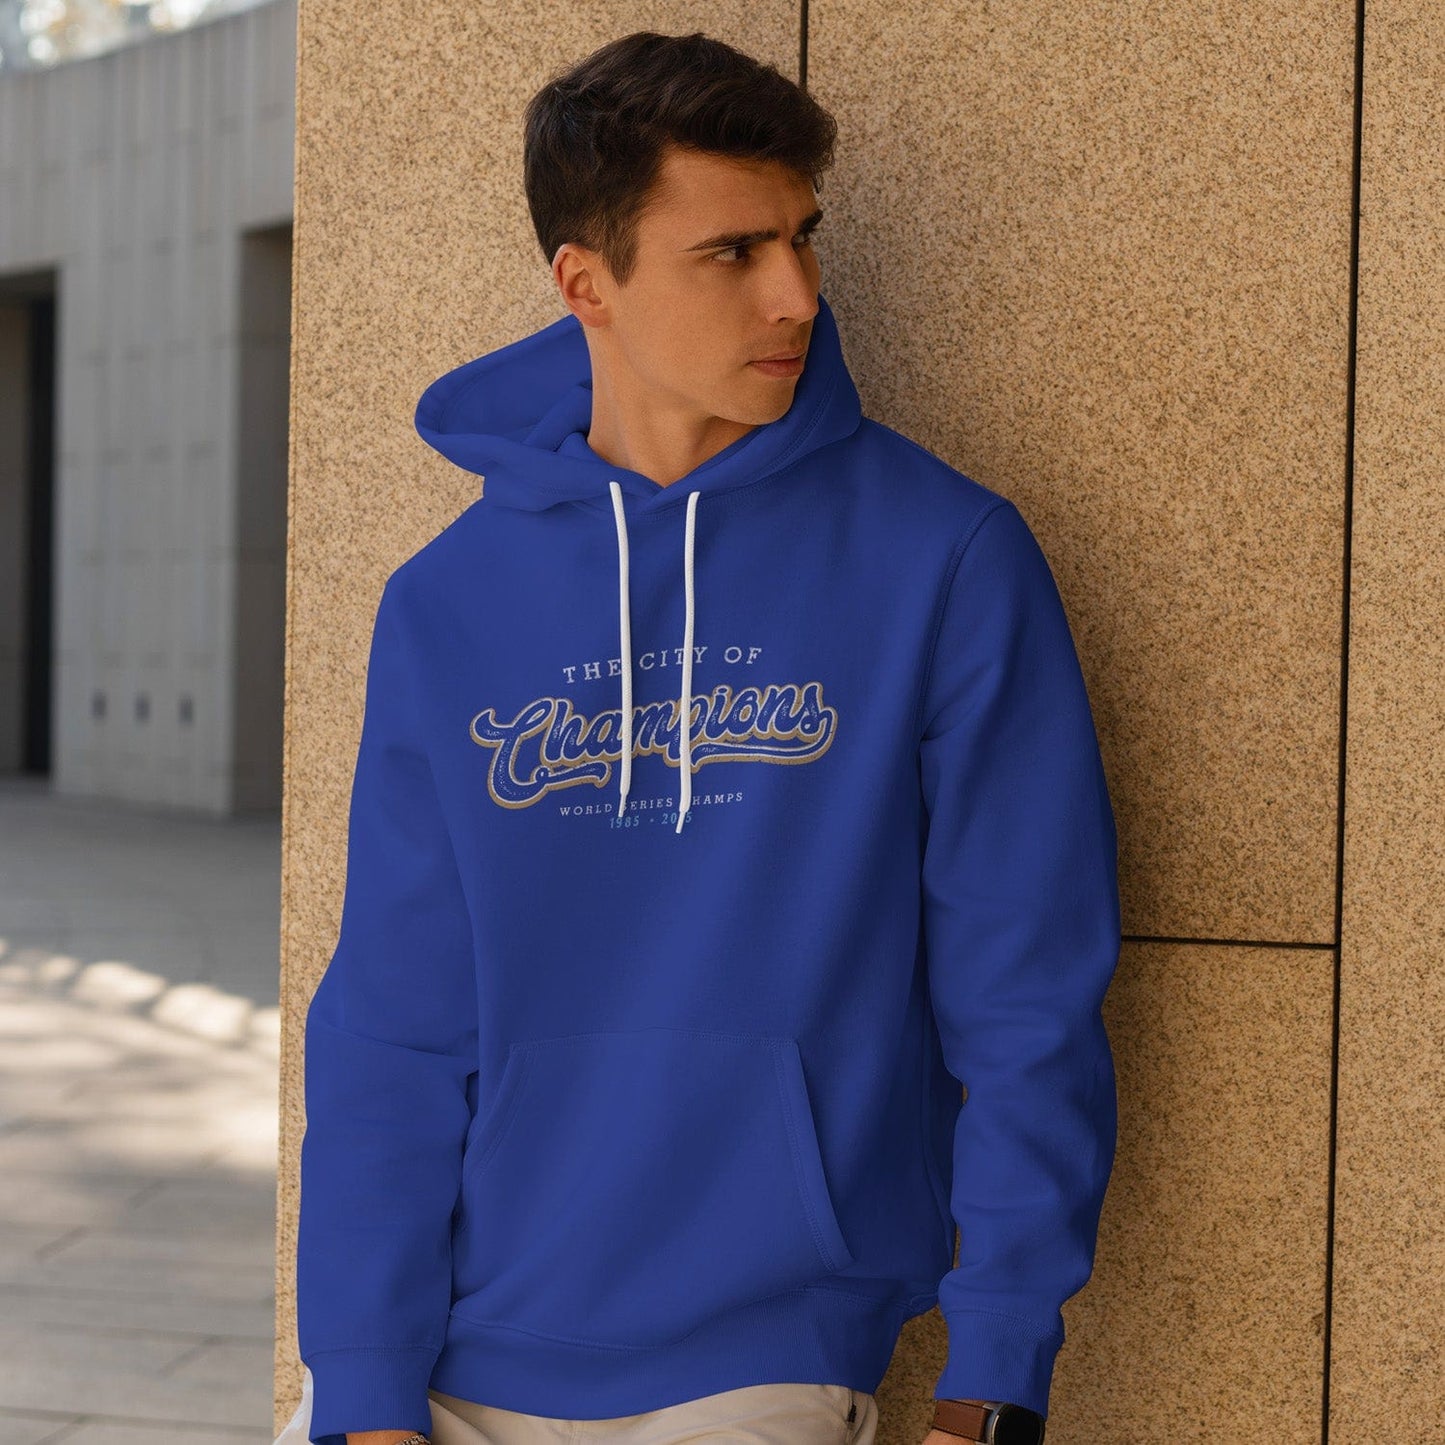 KC Swag Kansas City Royals white/gold CITY OF CHAMPIONS on royal blue pull-over hoodie worn by male model leaning against stone wall in outdoor plaza